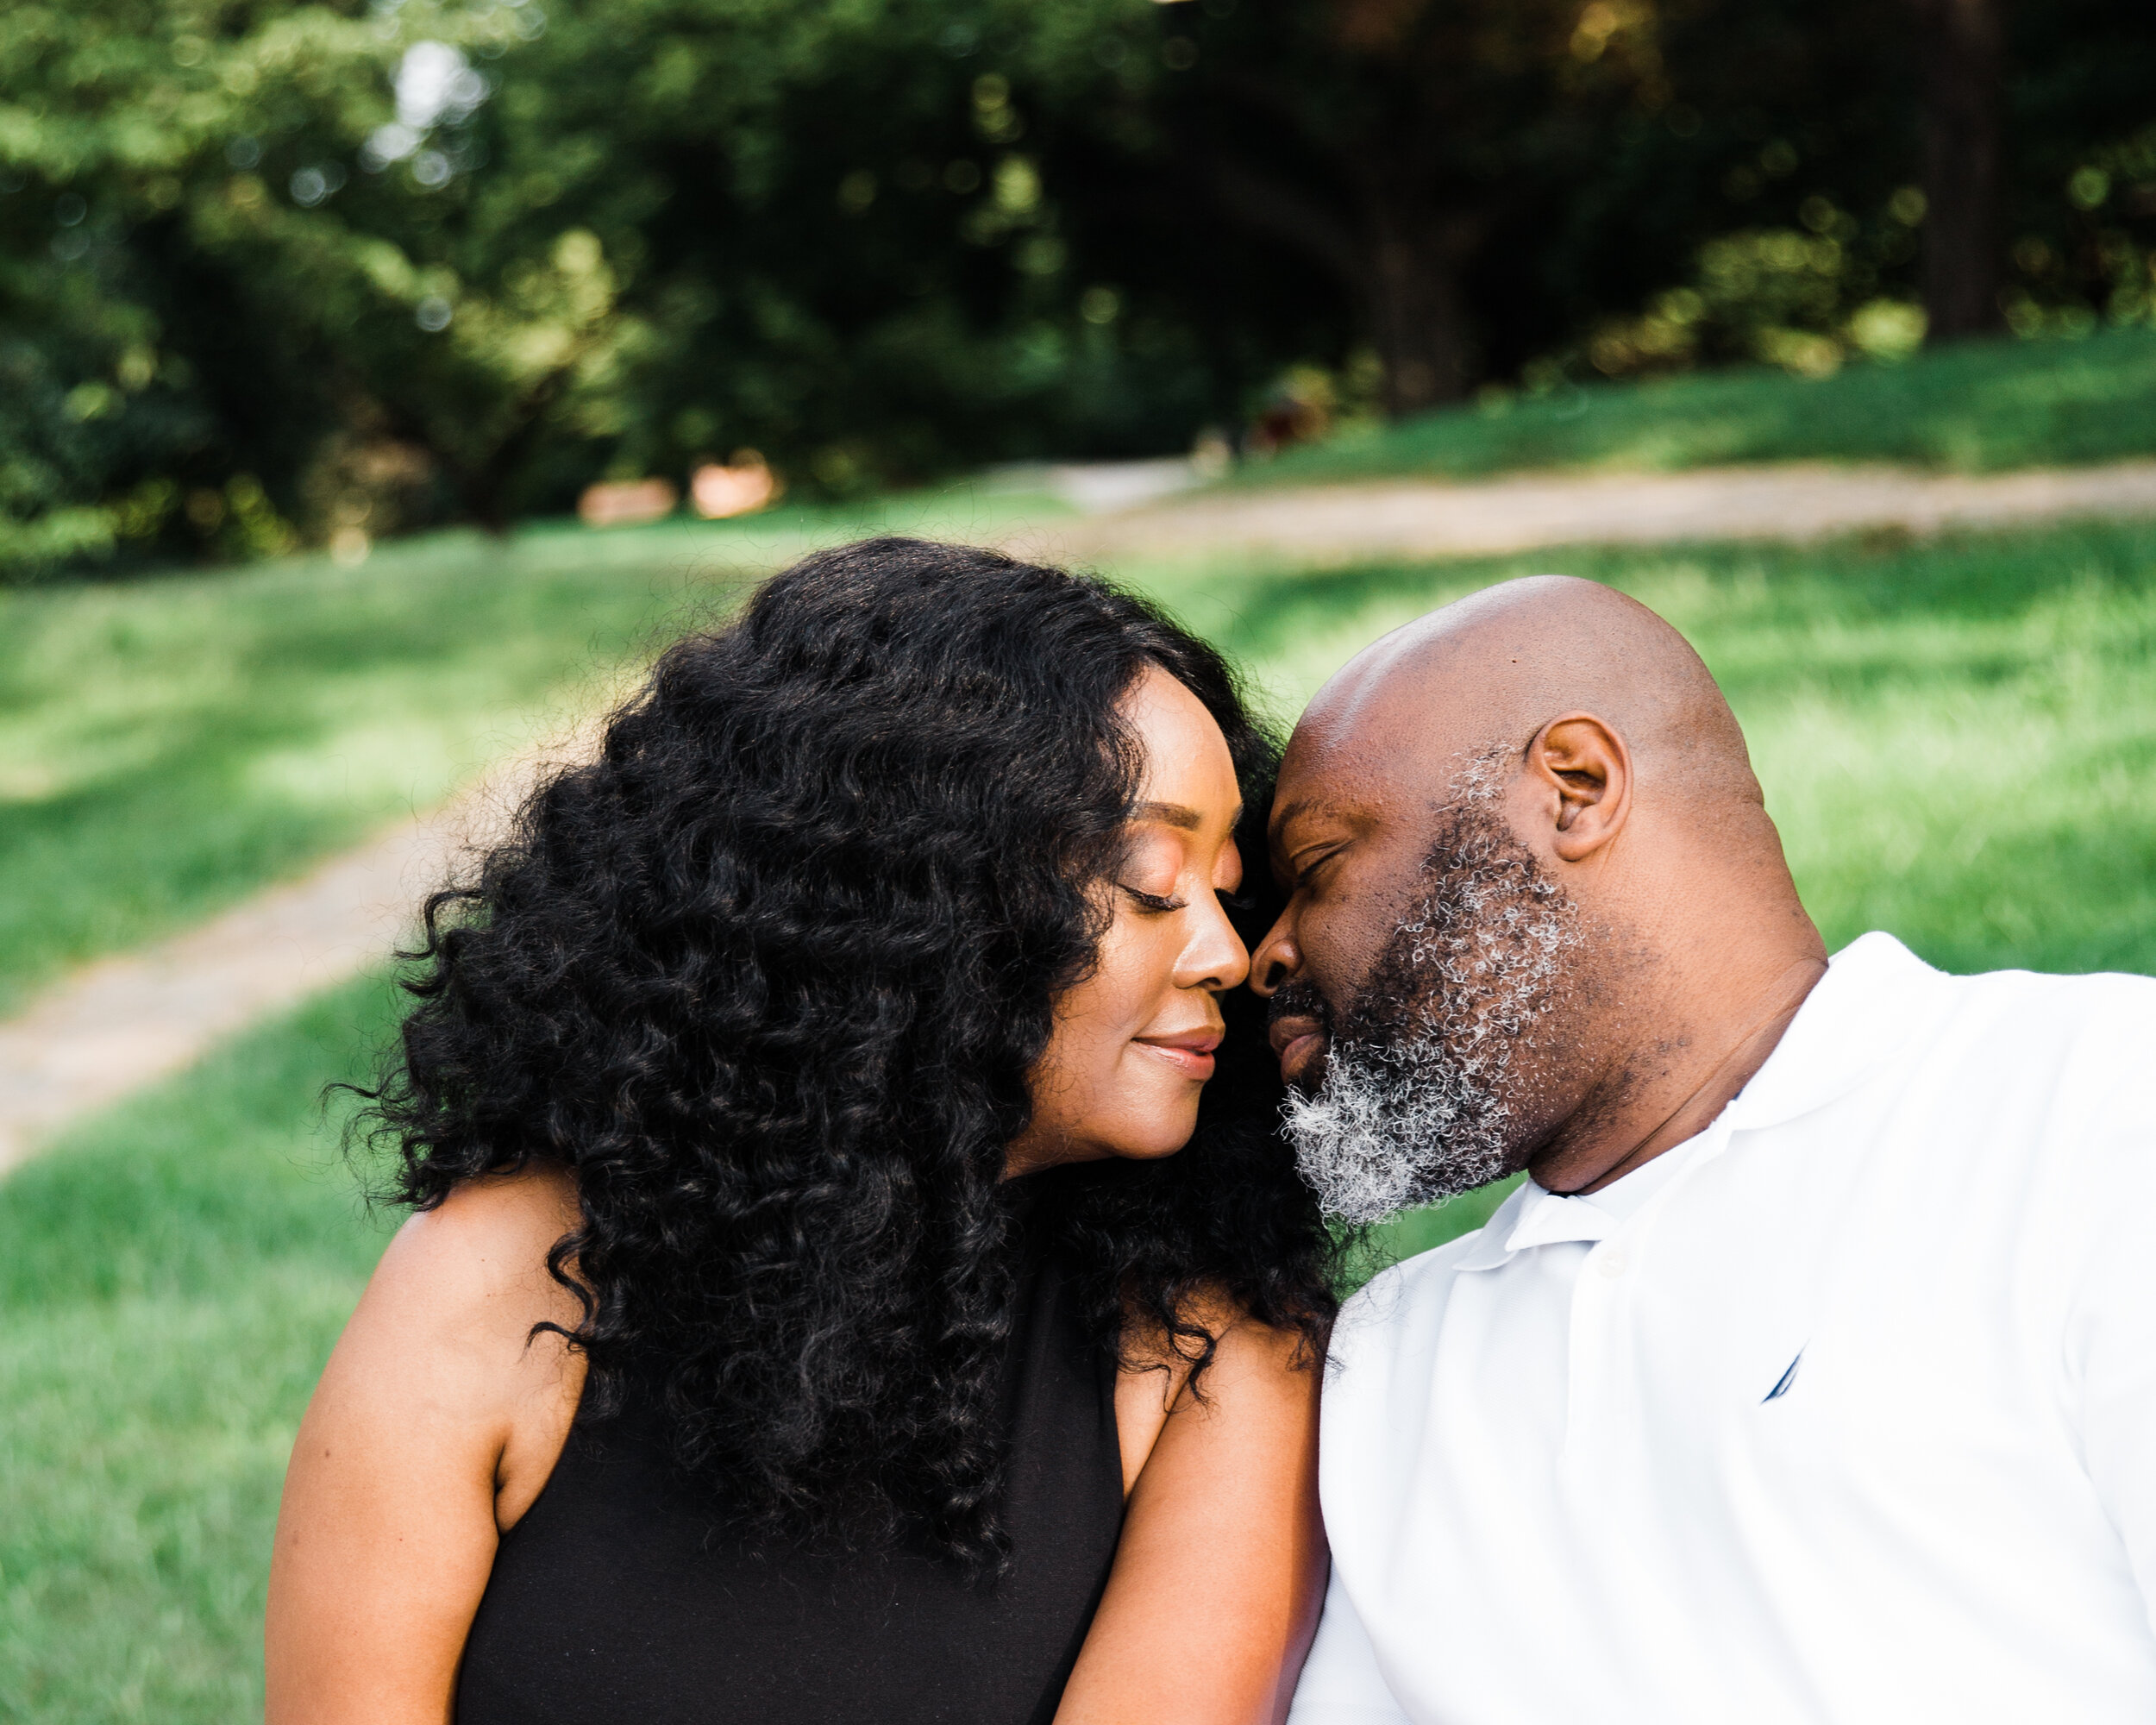 Patterson Park Engagement Session with Black Photographers Megapixels media in Baltimore Maryland (23 of 32).jpg